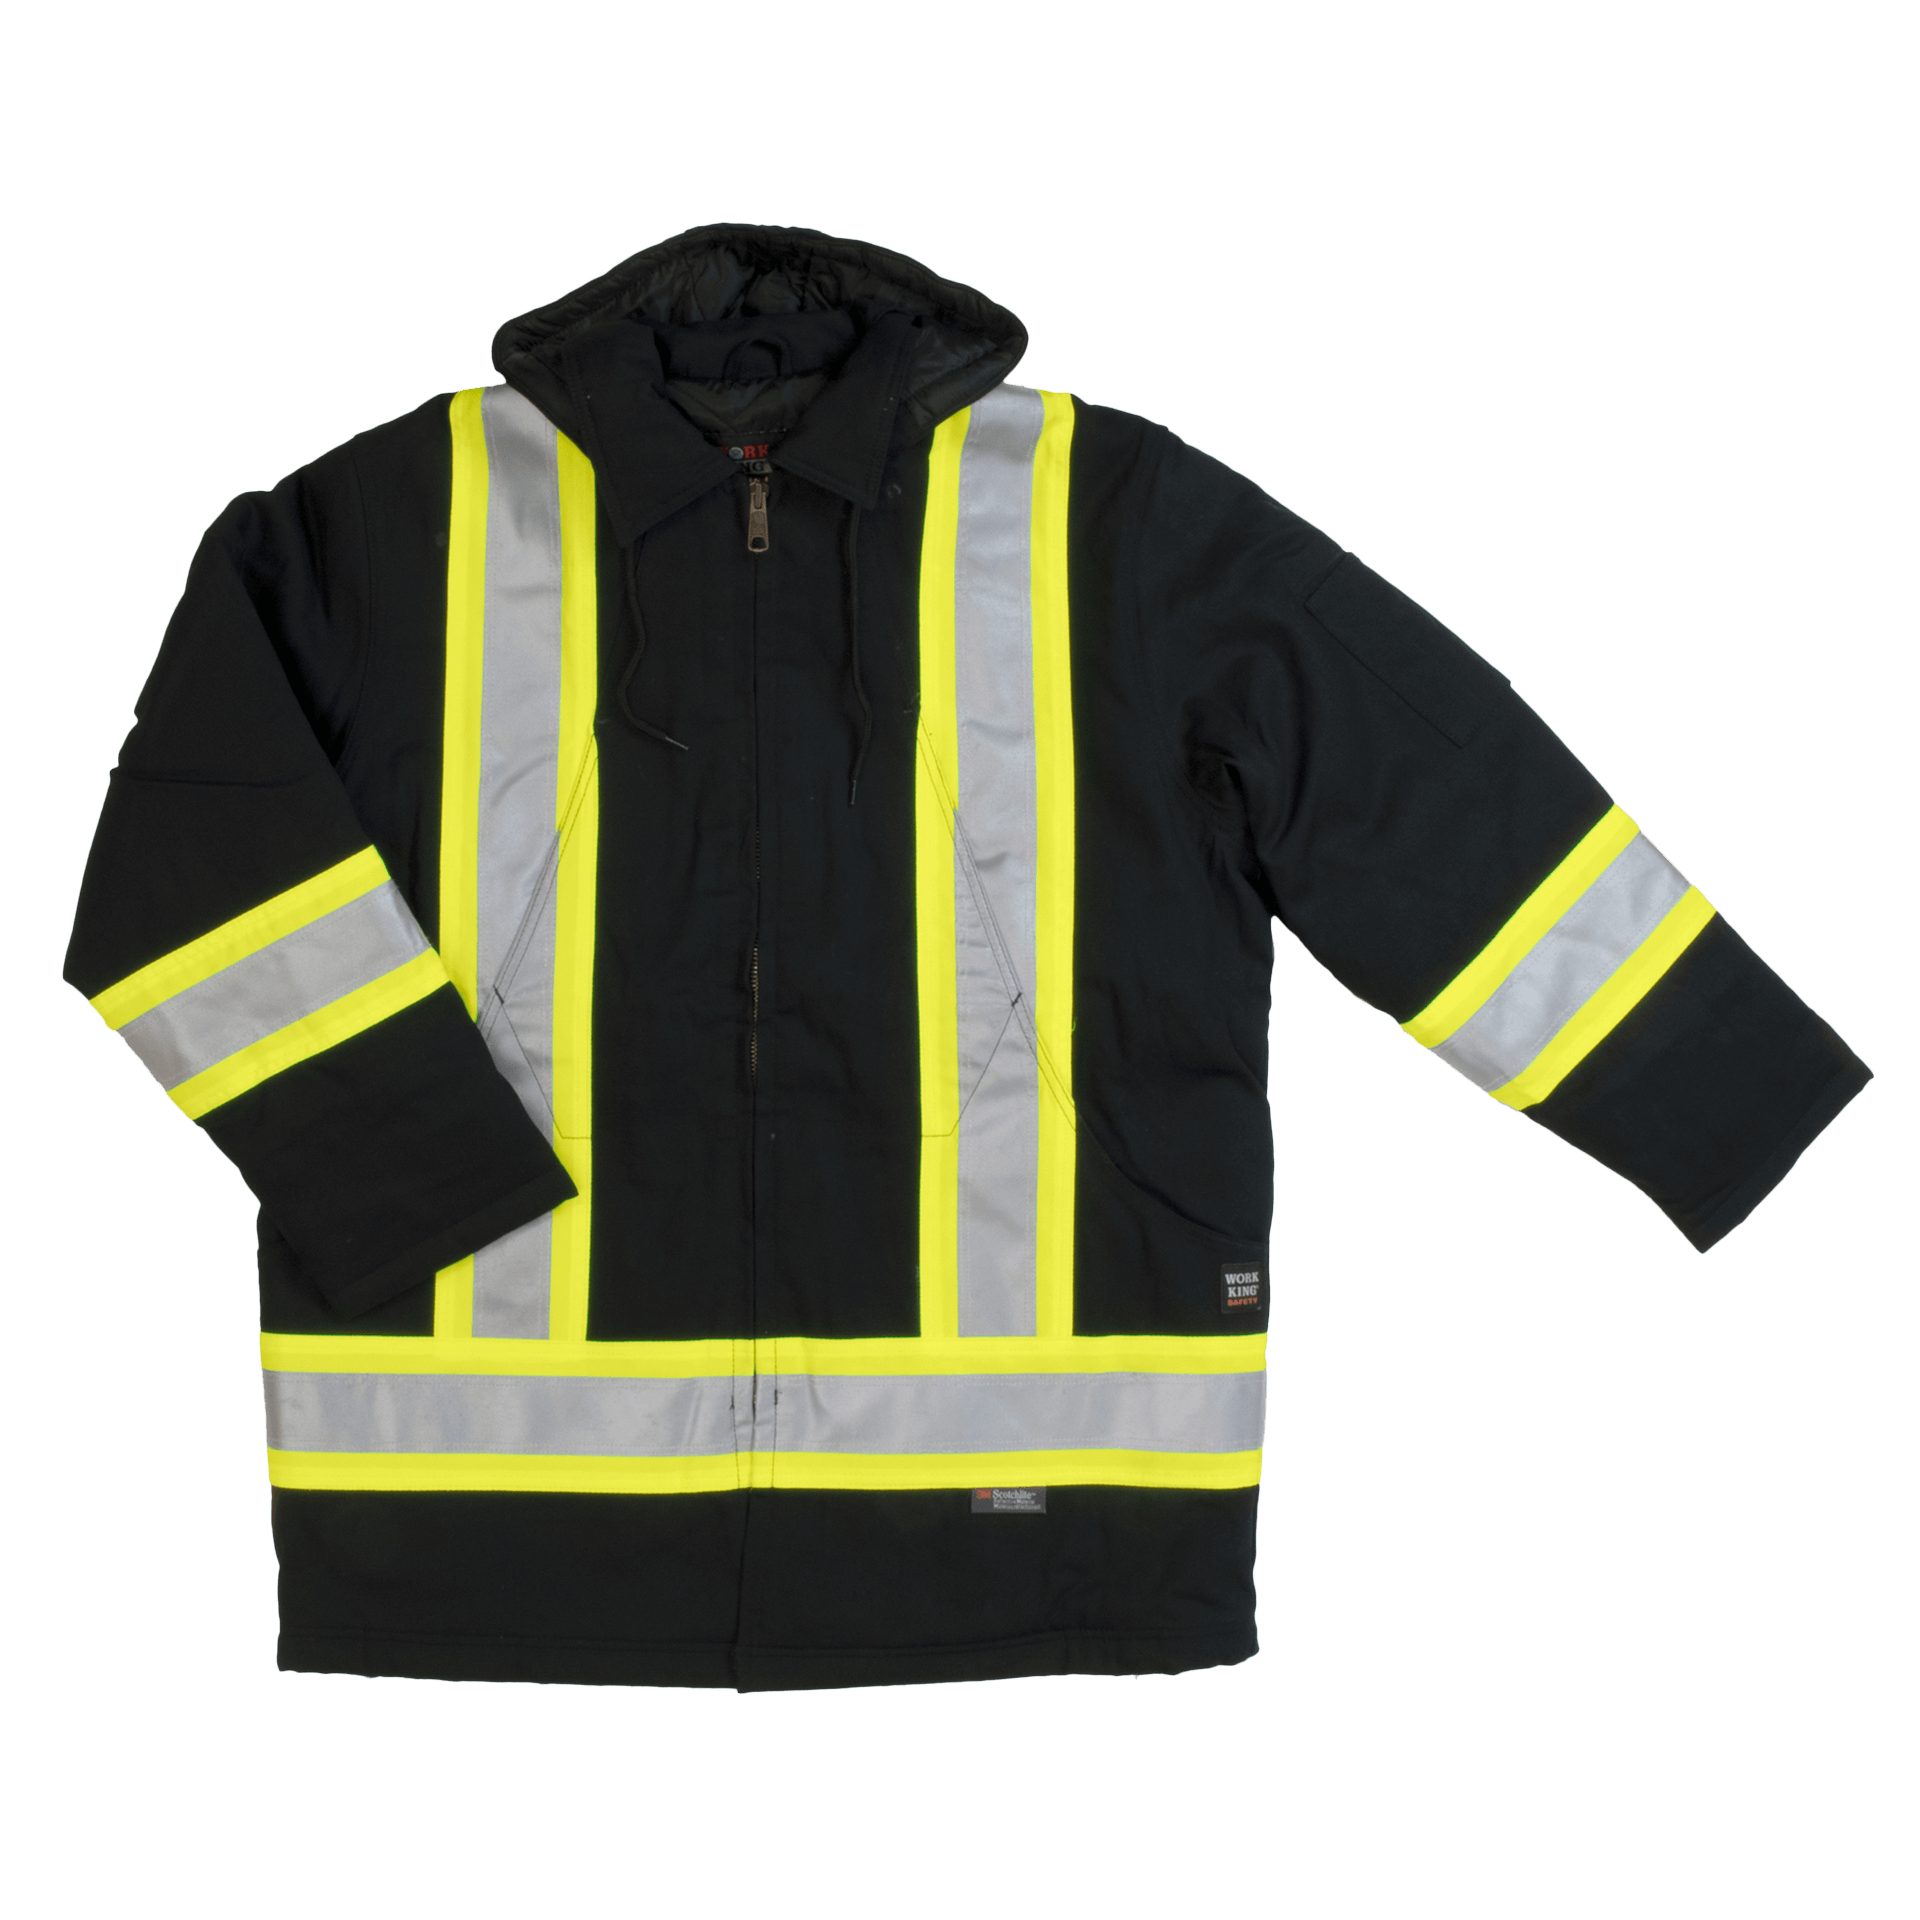 Tough Duck Fleece Lined Safety Jacket - S157 - Black